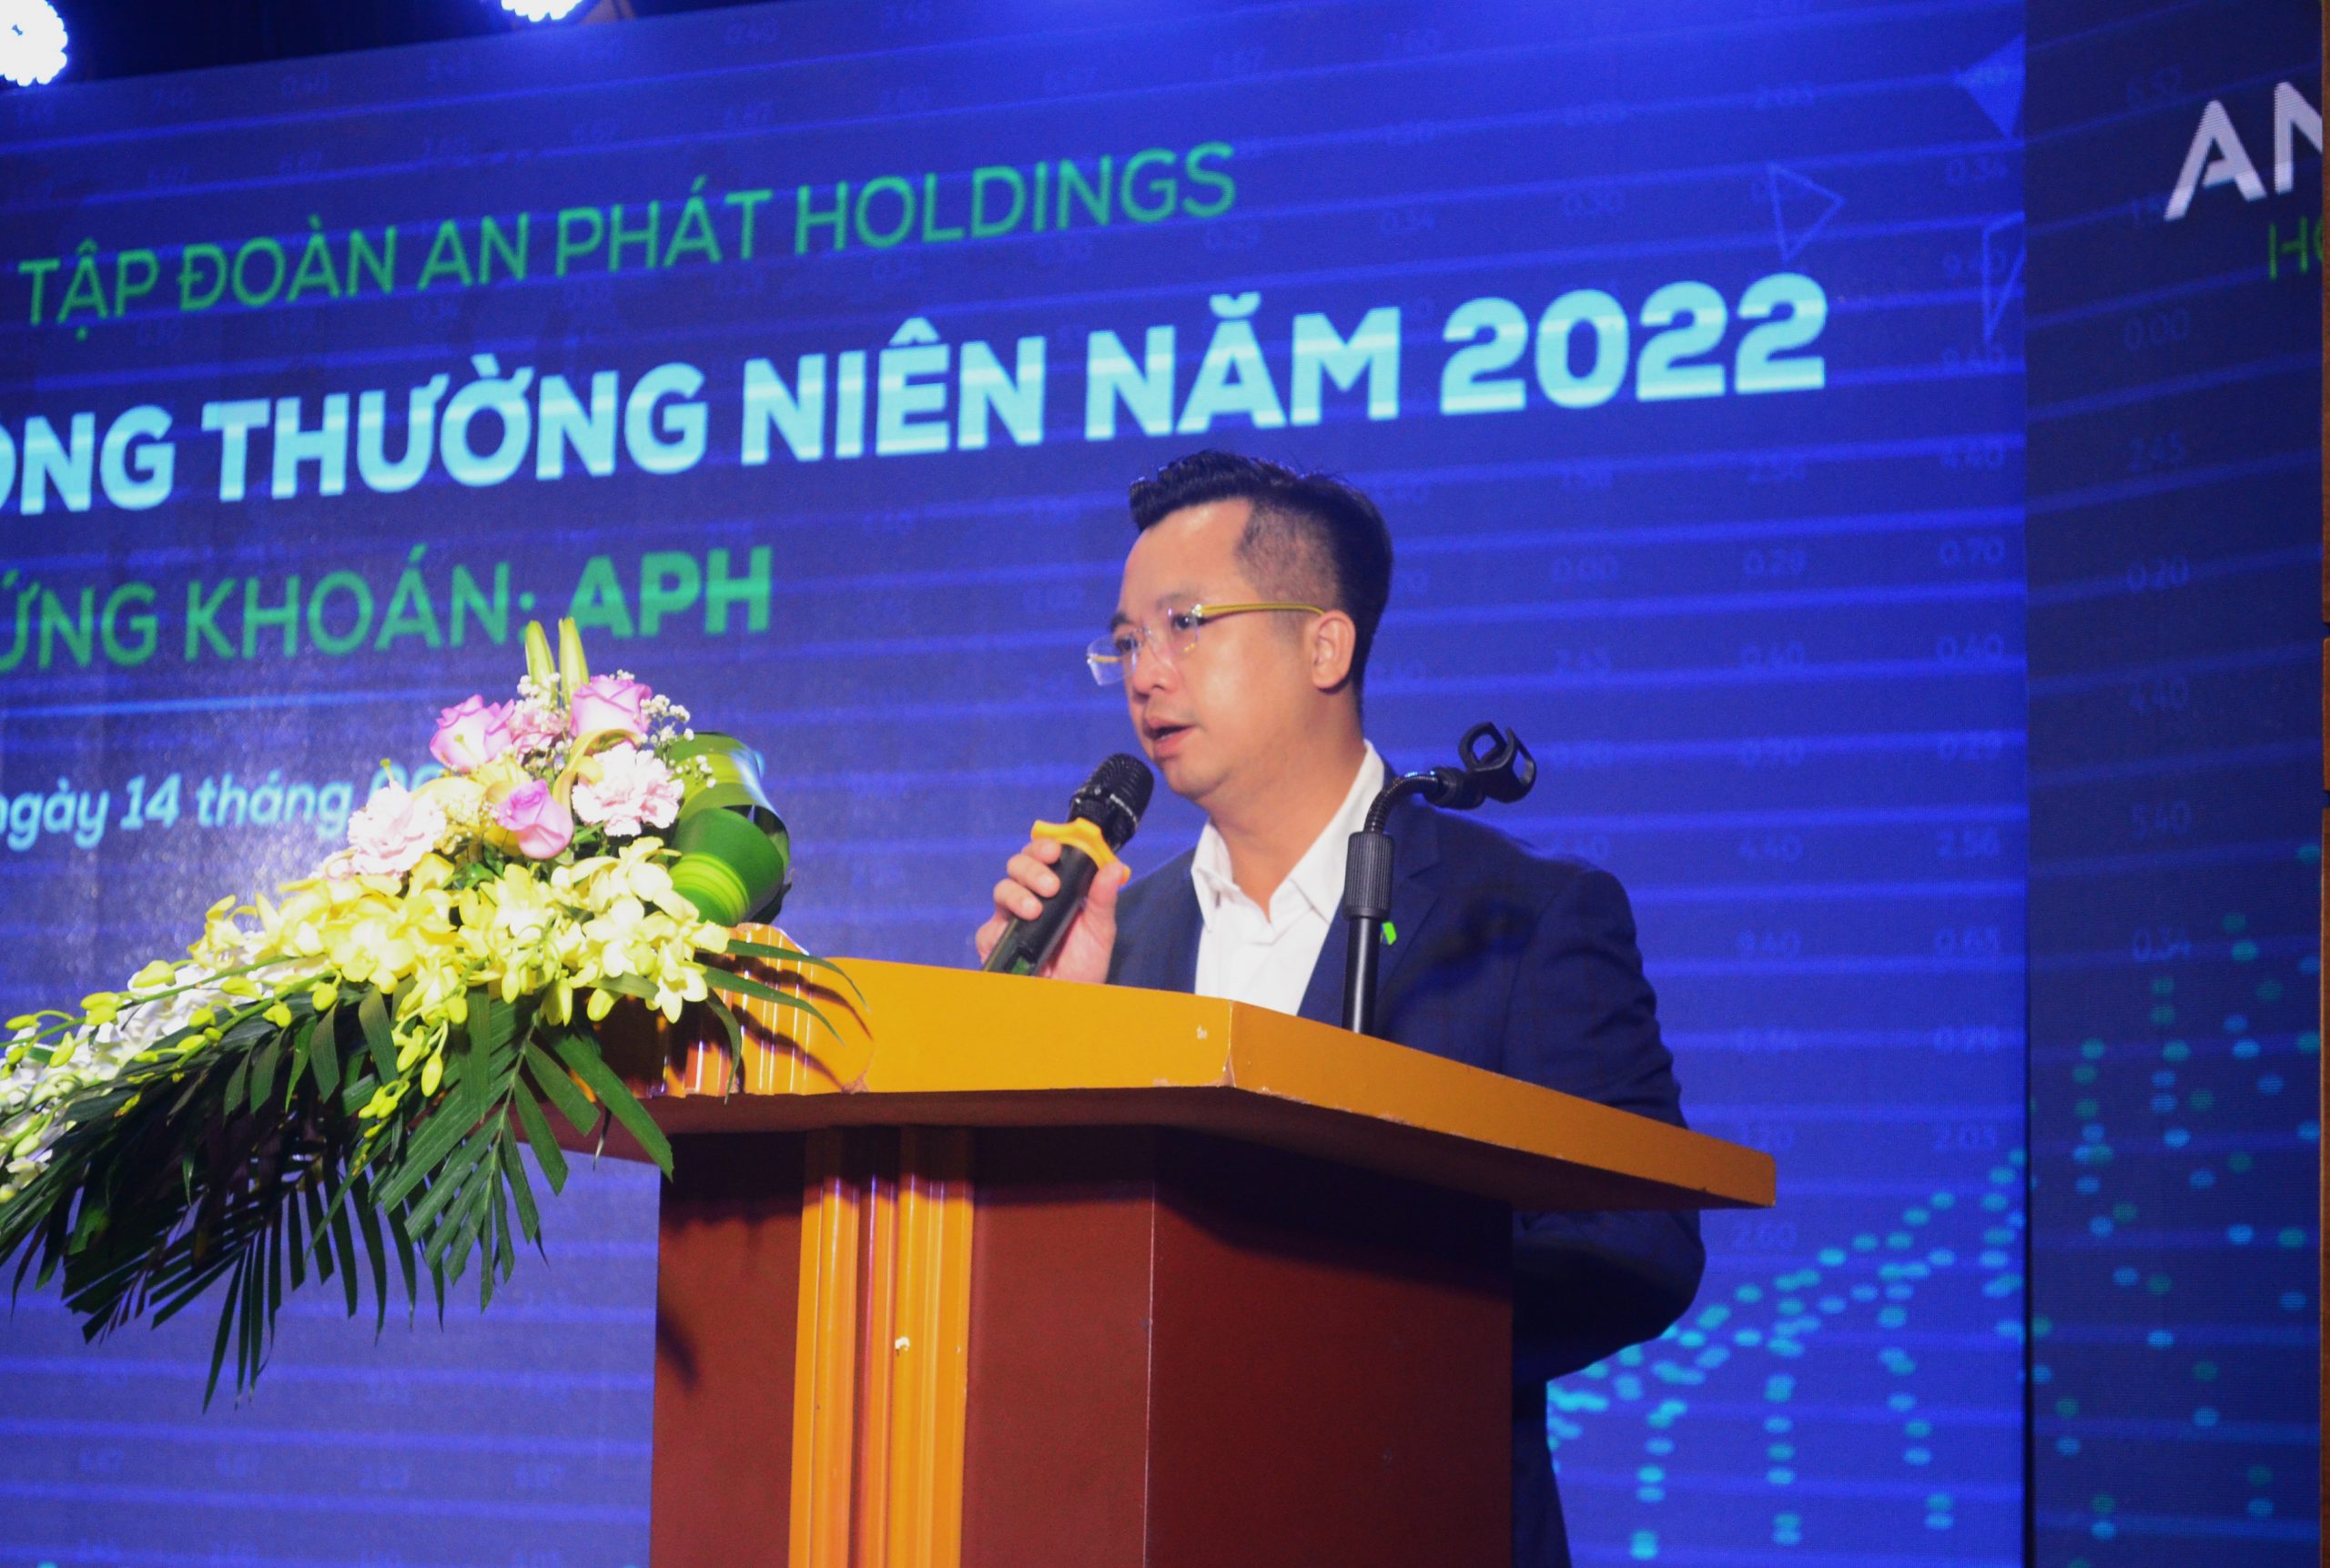 An Phat Holdings’ Annual General Shareholders’ Meeting 2022: Approving target revenue of VND 16,500 billion